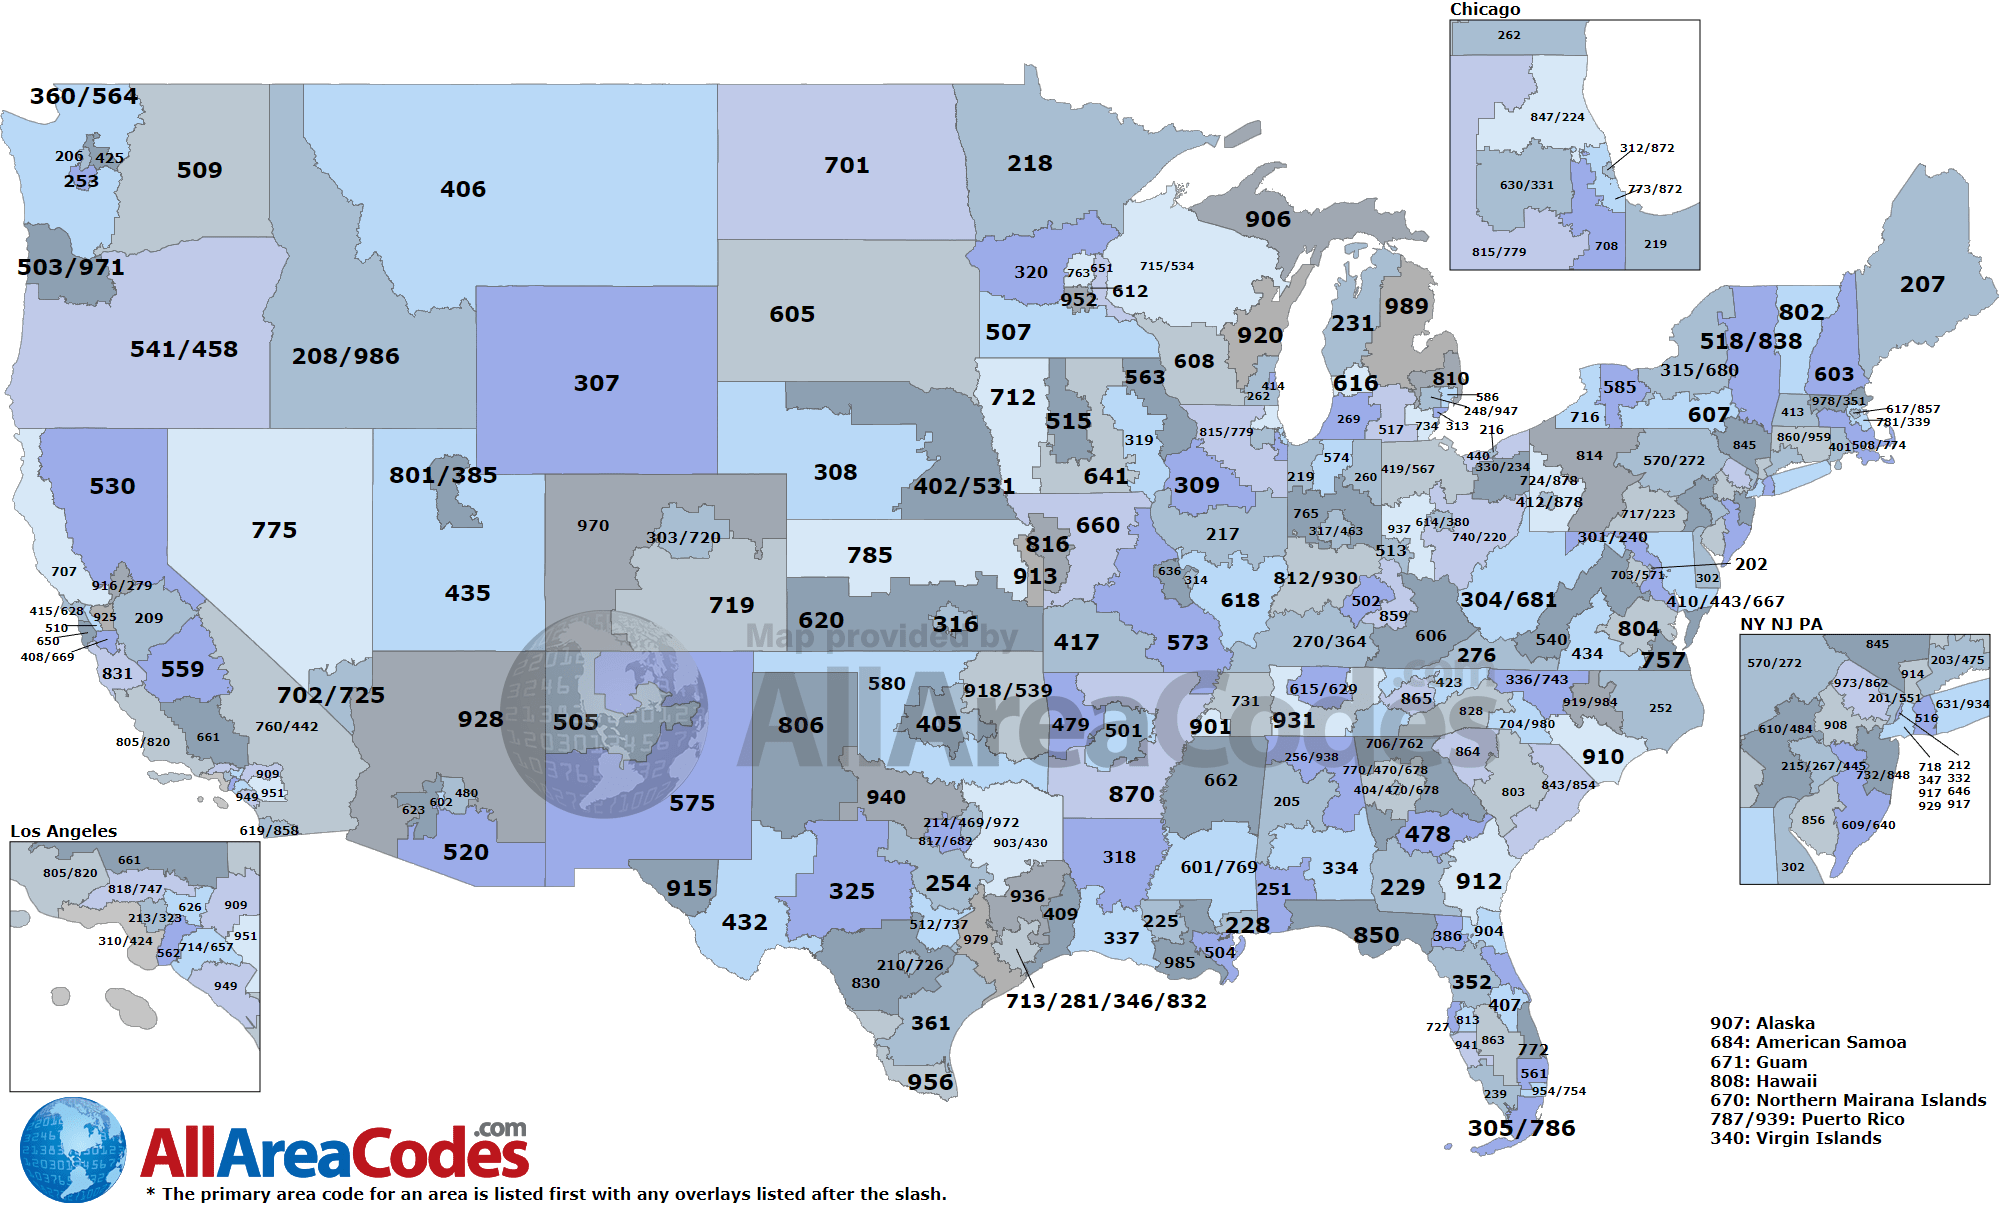 There are 335 area codes in the United States. 